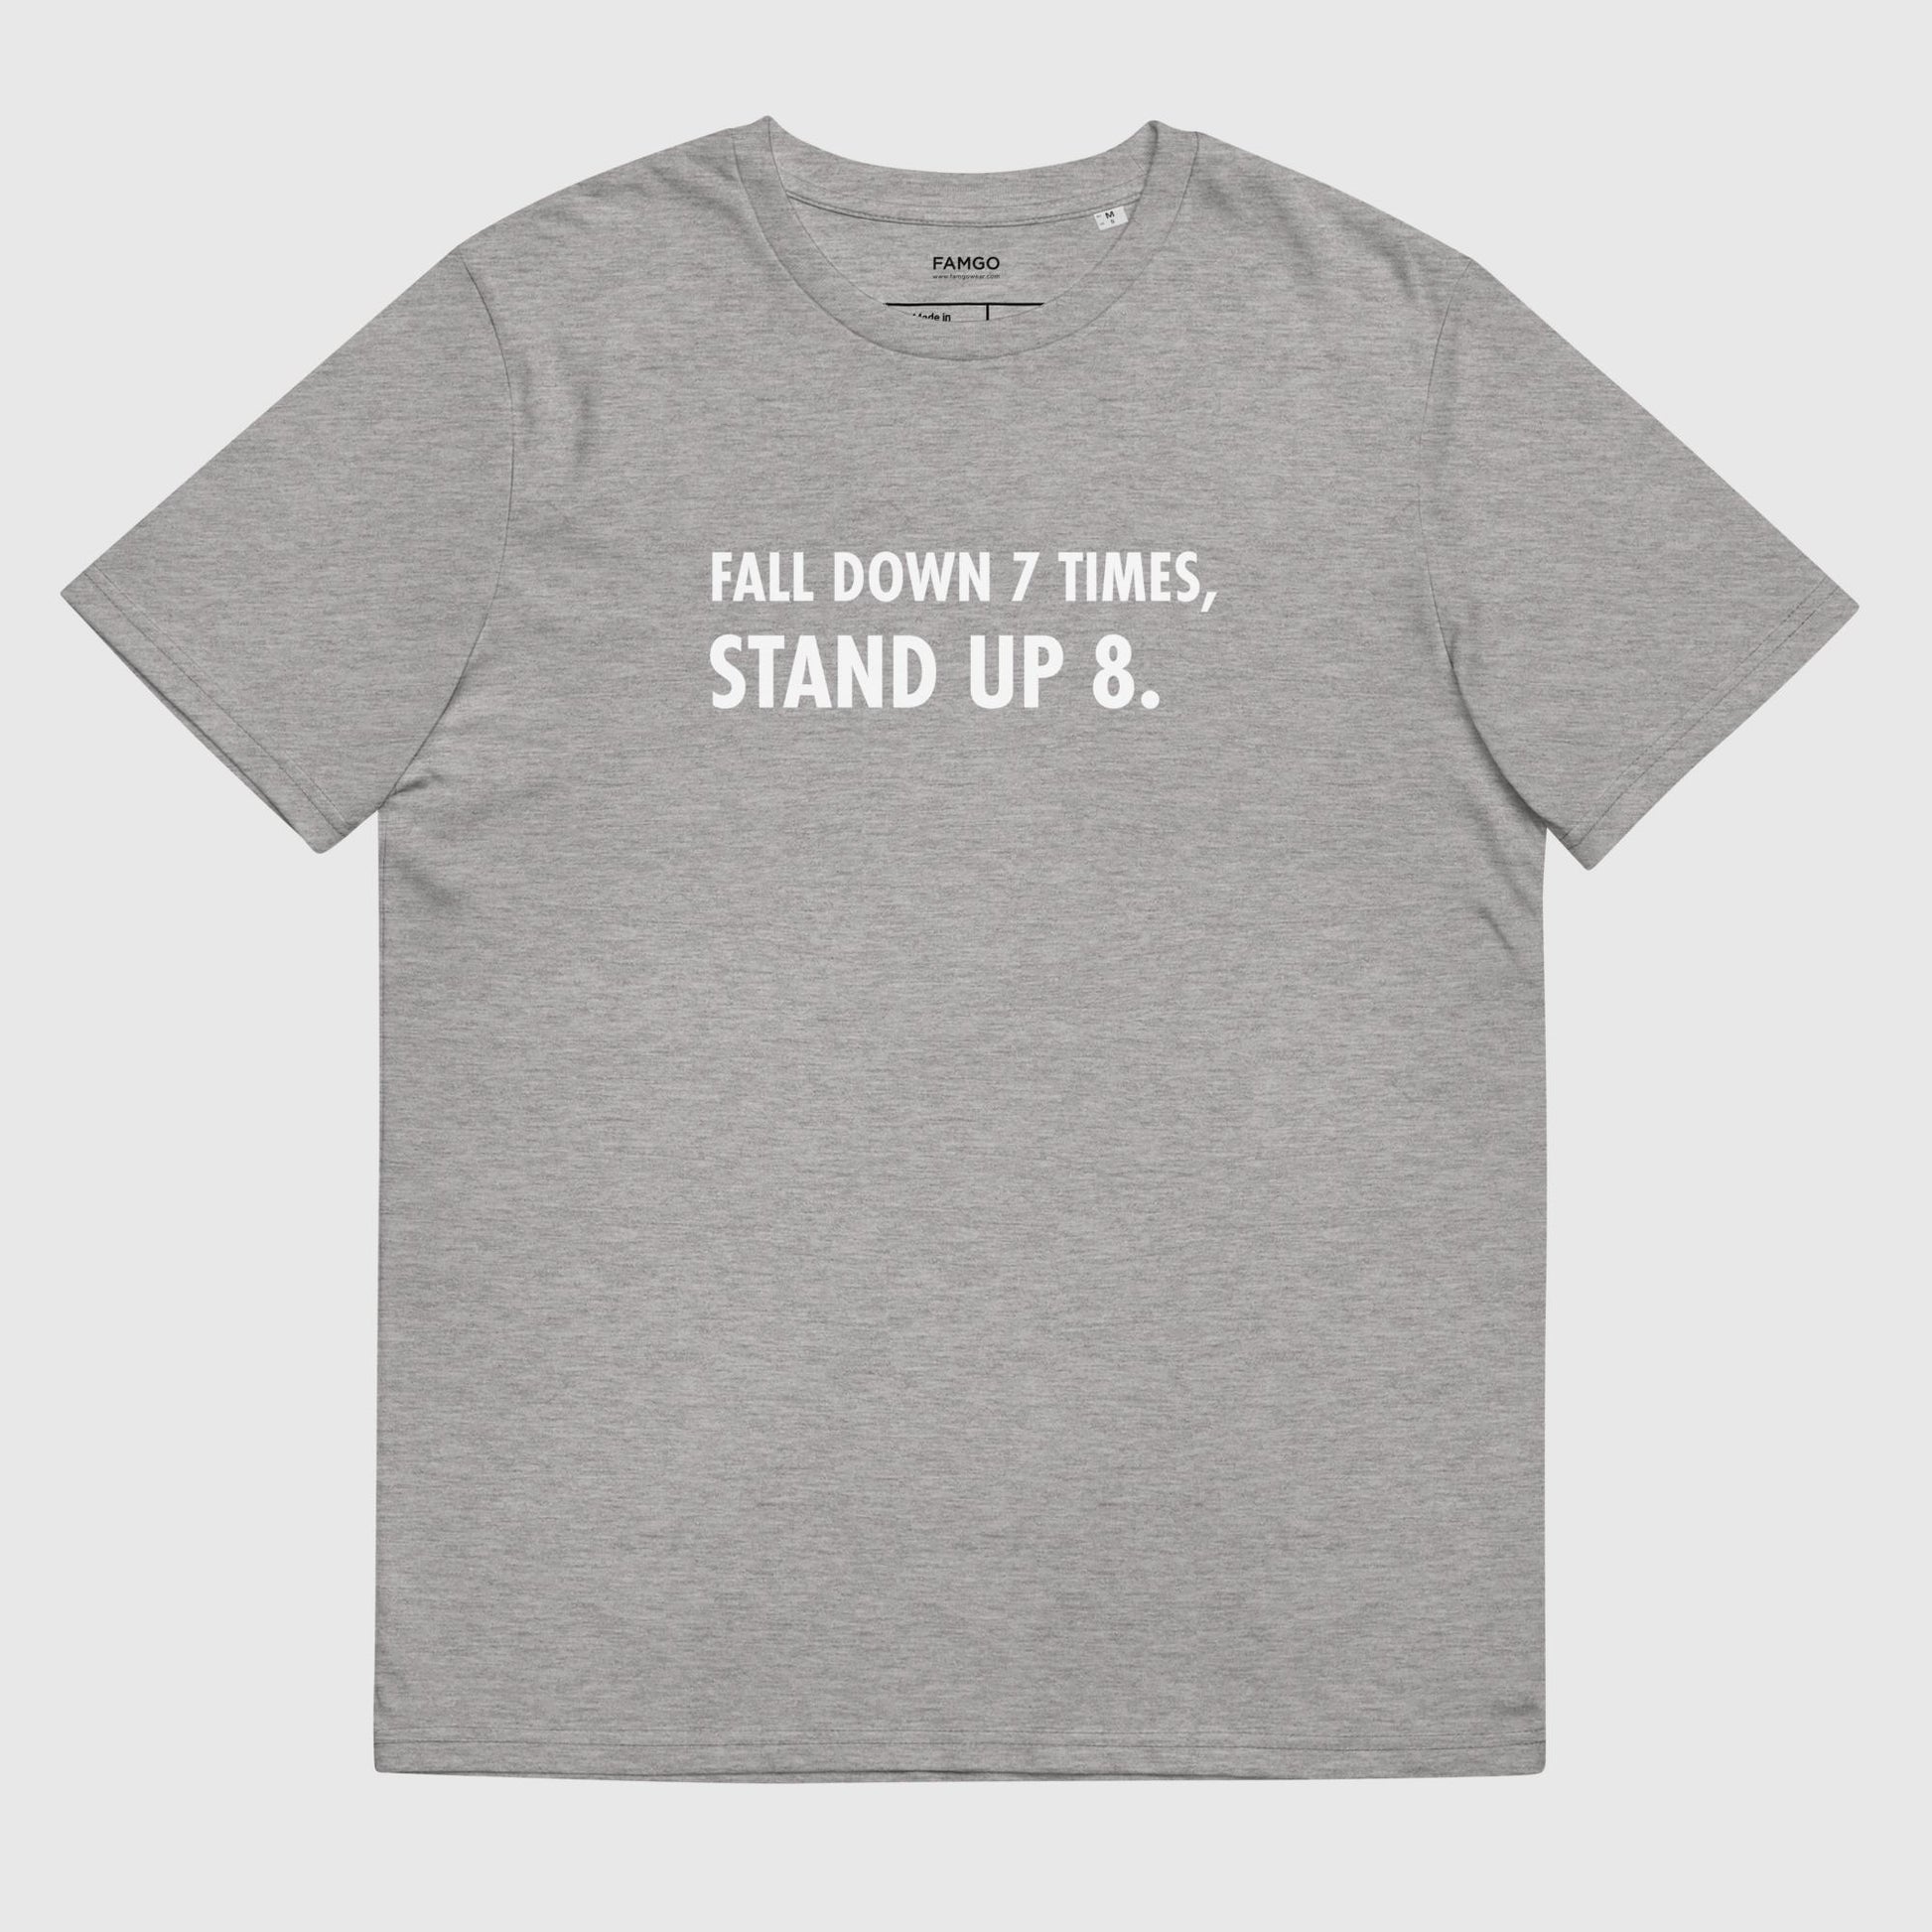 Men's light gray organic cotton t-shirt that features the Japanese proverb "Fall Down 7 Times, Stand Up 8."